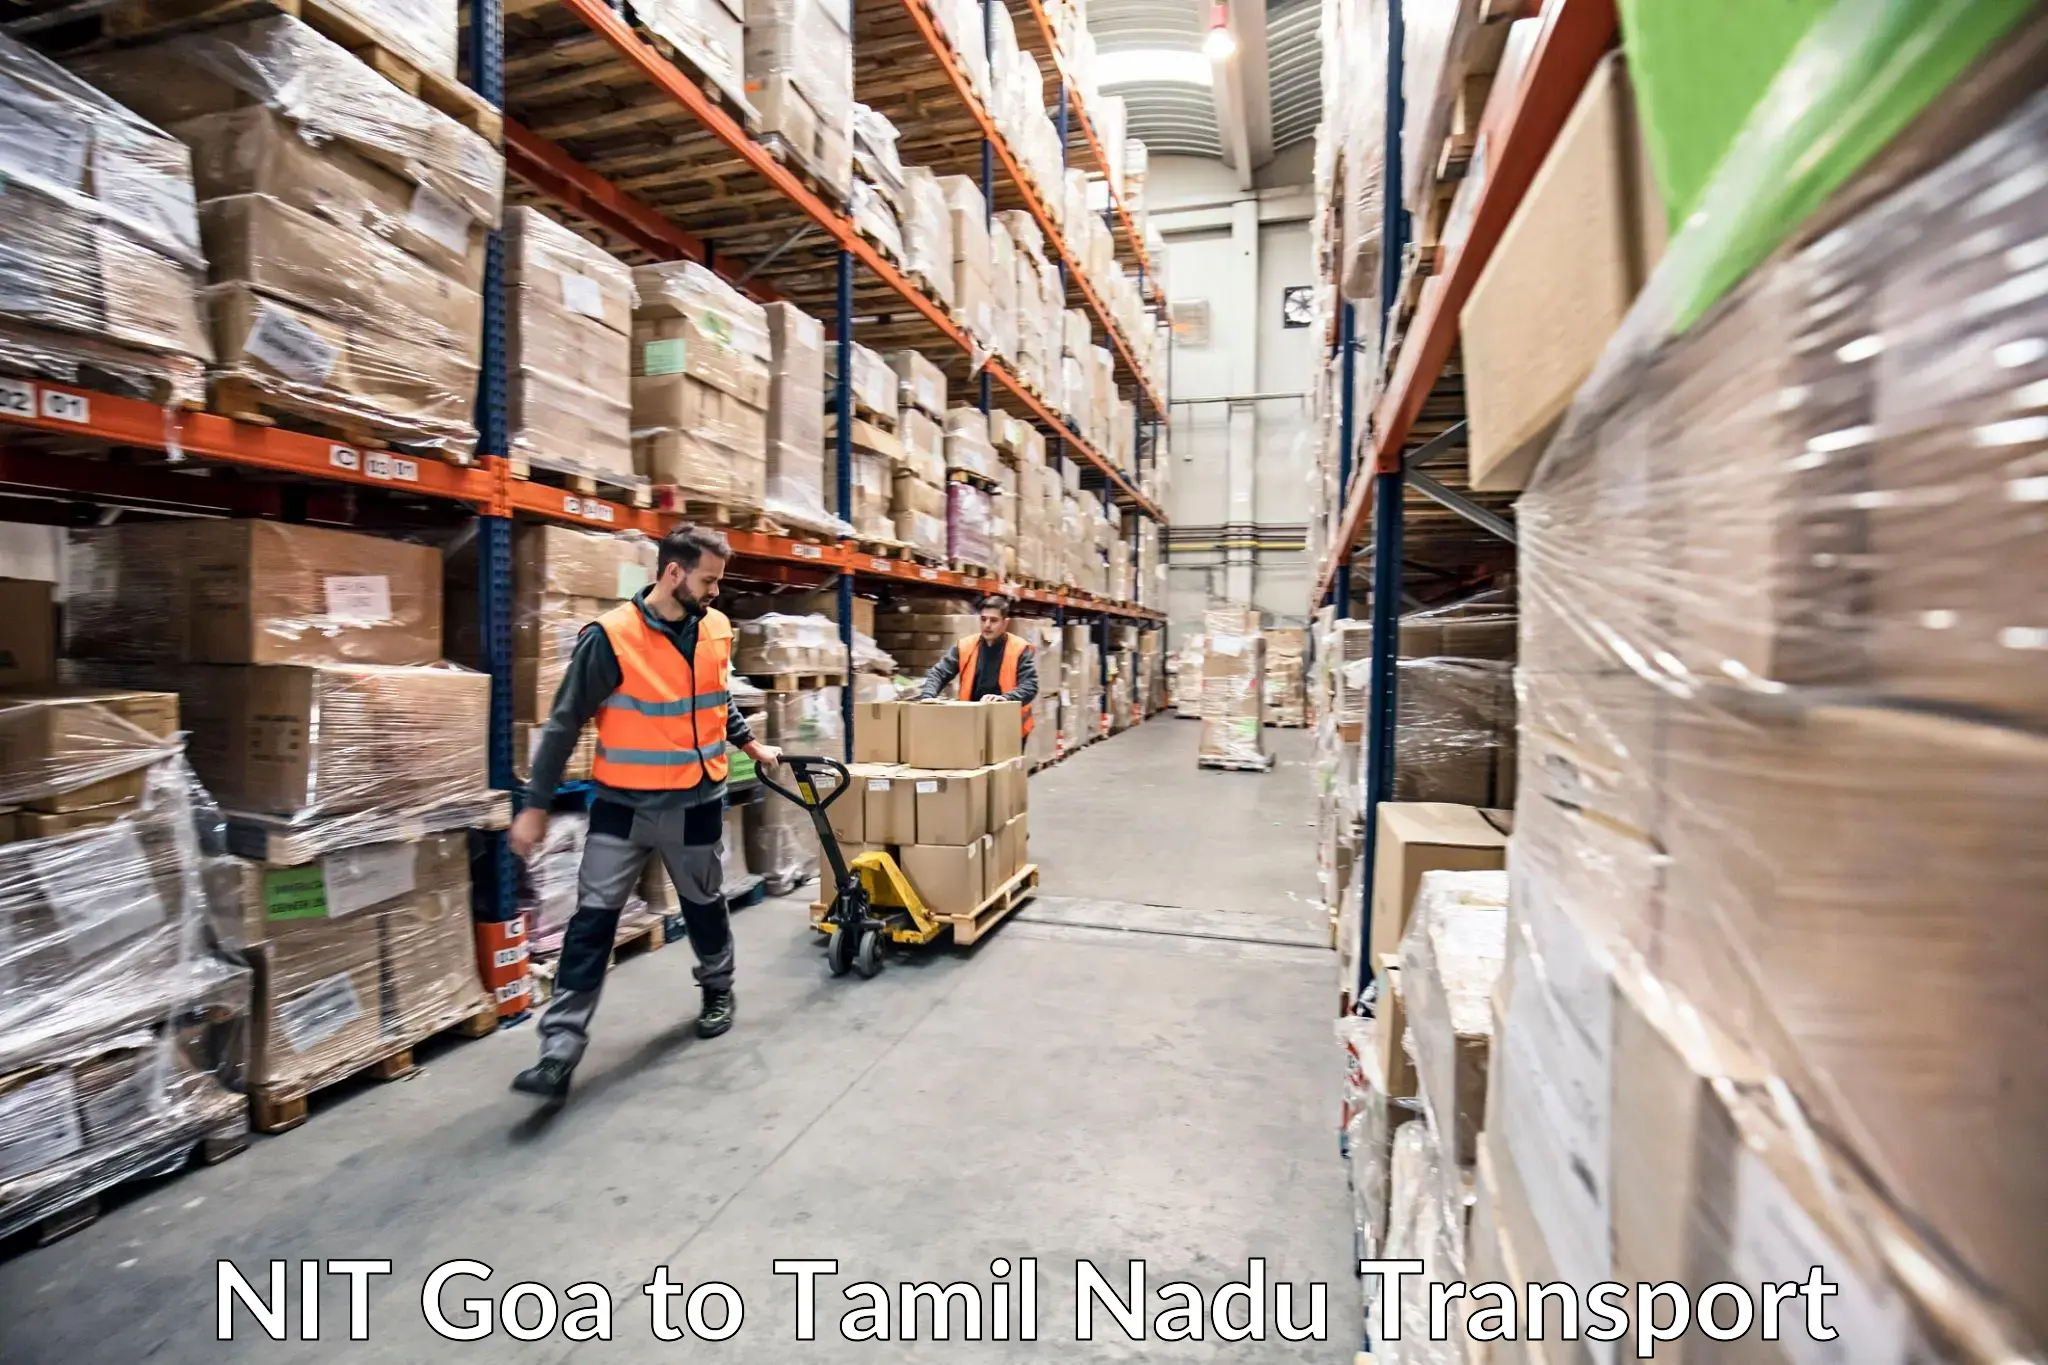 Air freight transport services NIT Goa to Tamil Nadu